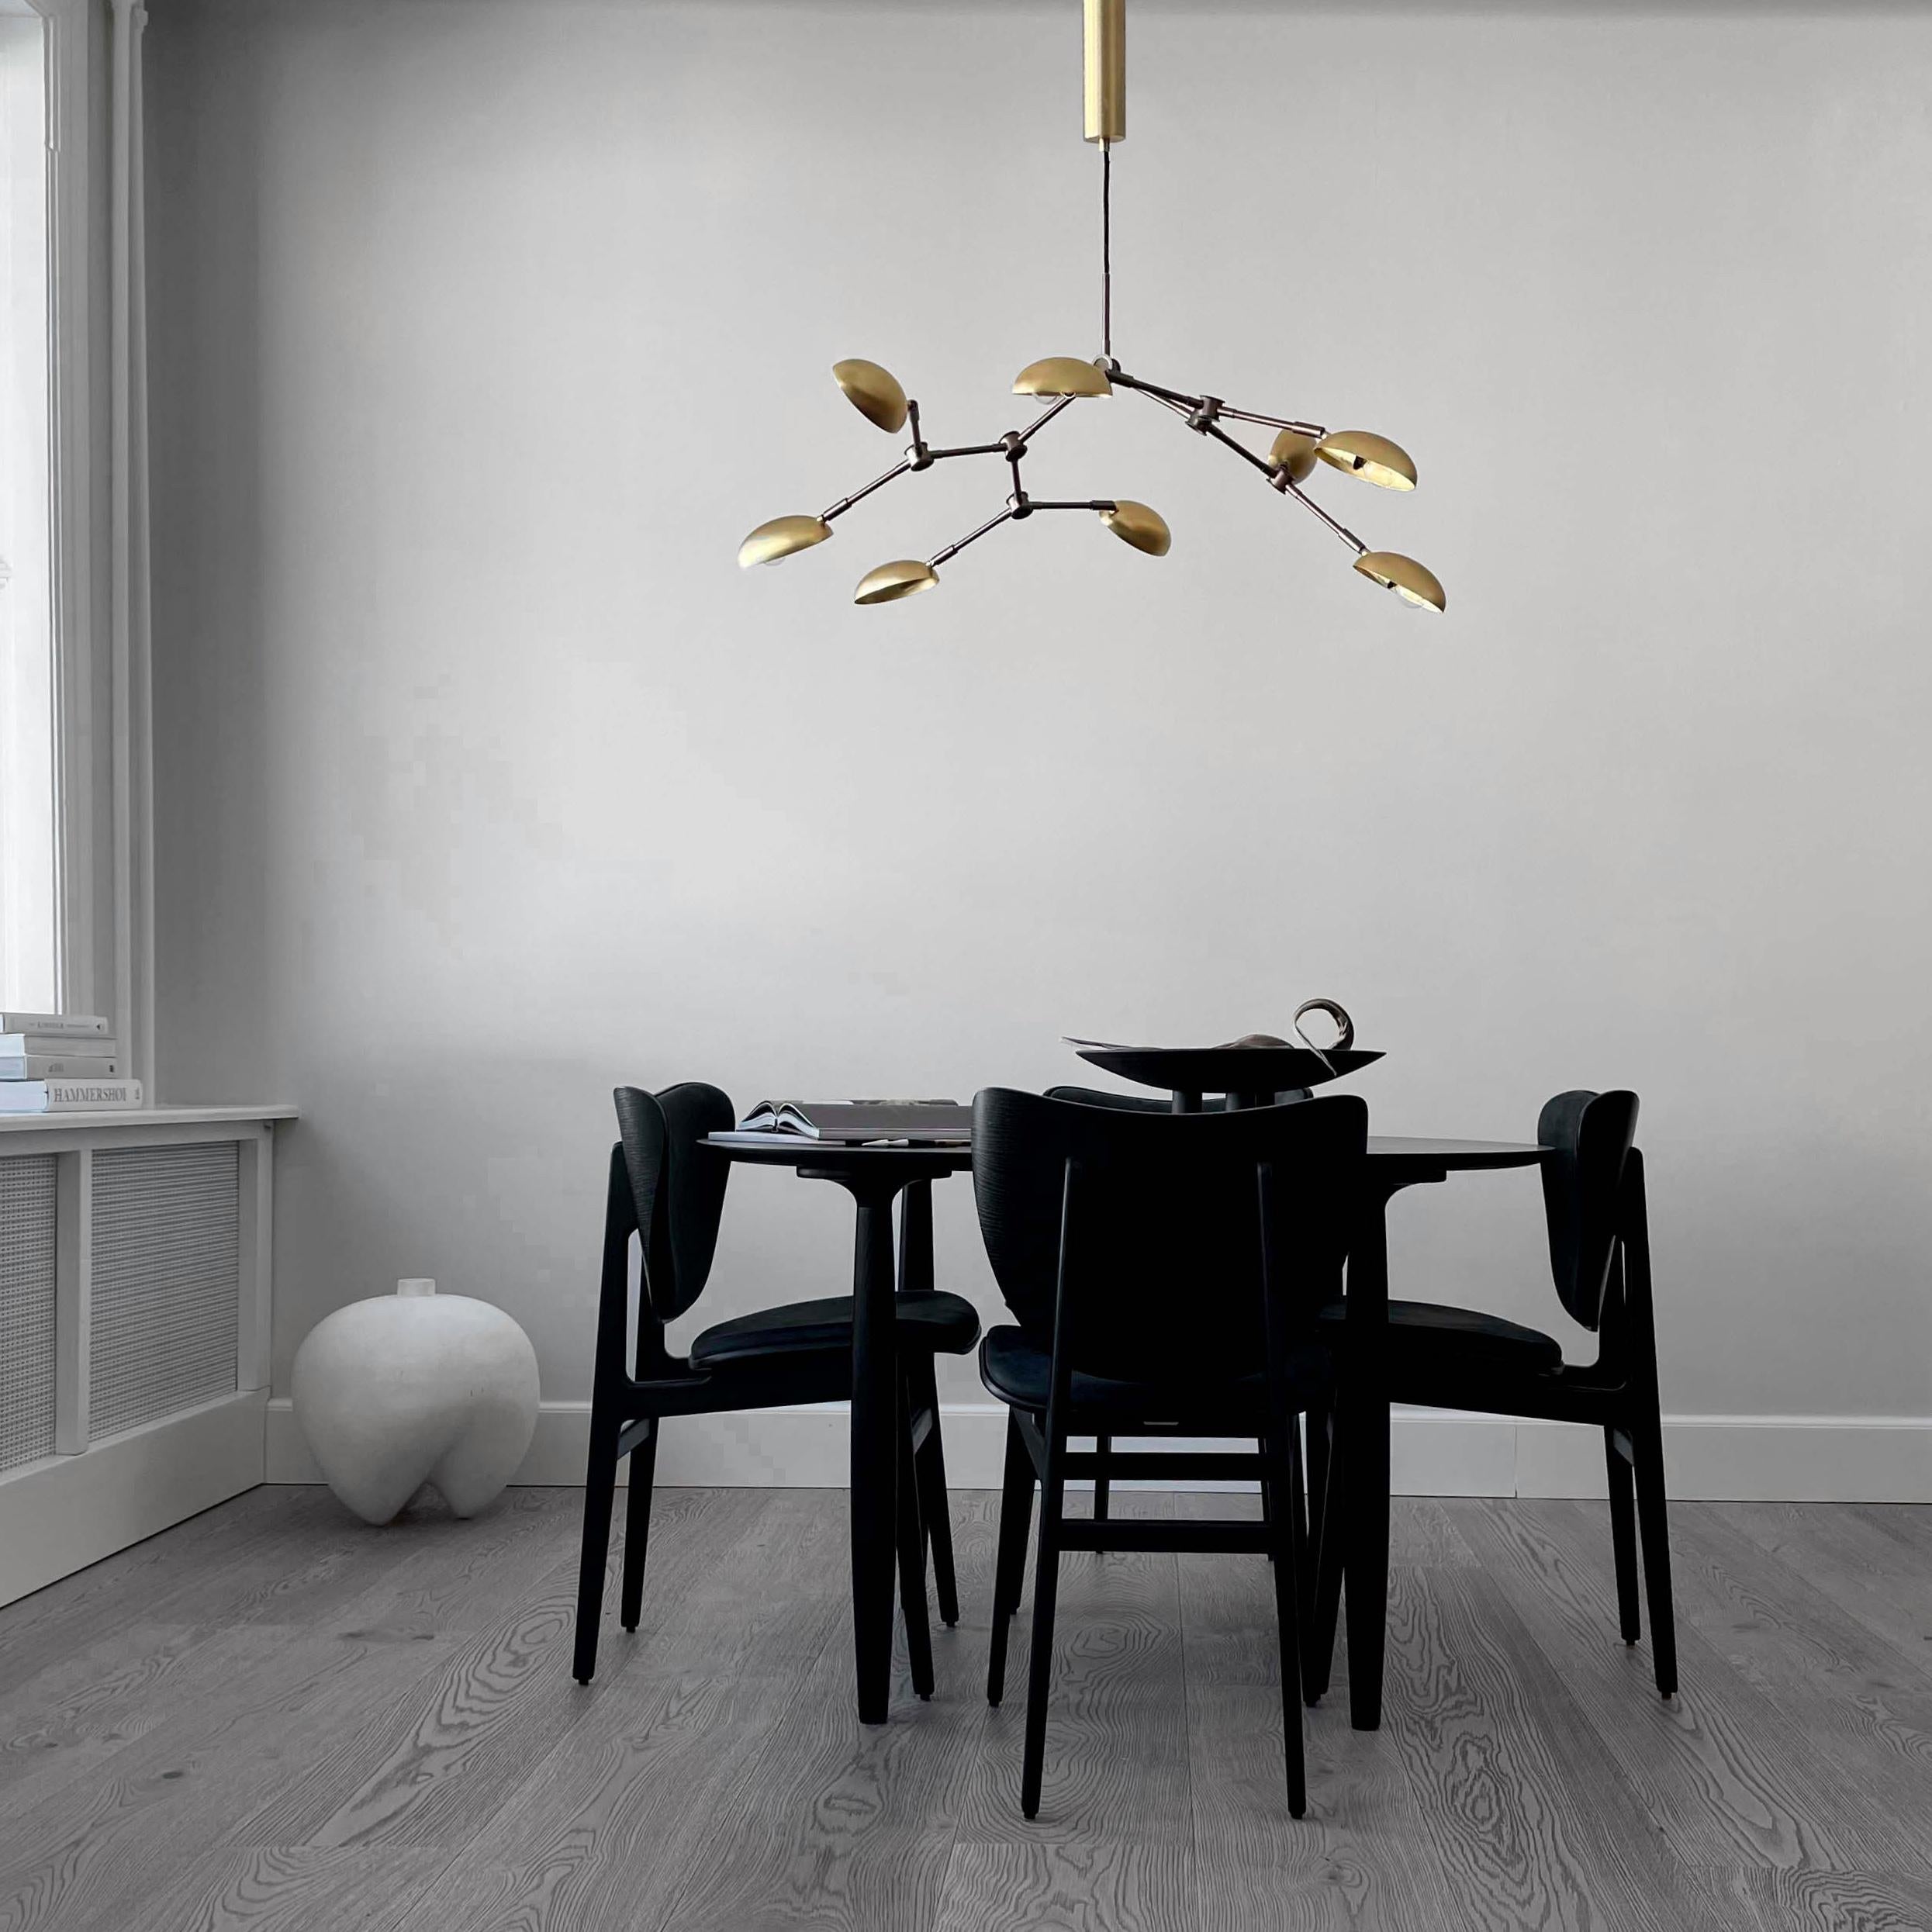 Drop chandelier brass by 101 Copenhagen
Designed by Kristian Sofus Hansen & Tommy Hyldahl.
Dimensions: L155 x W91 x H21 cm
Materials: brass; lampshade & ceiling cup: 100% iron, with the plated brass finish; pipes & attachment parts are made of 100%